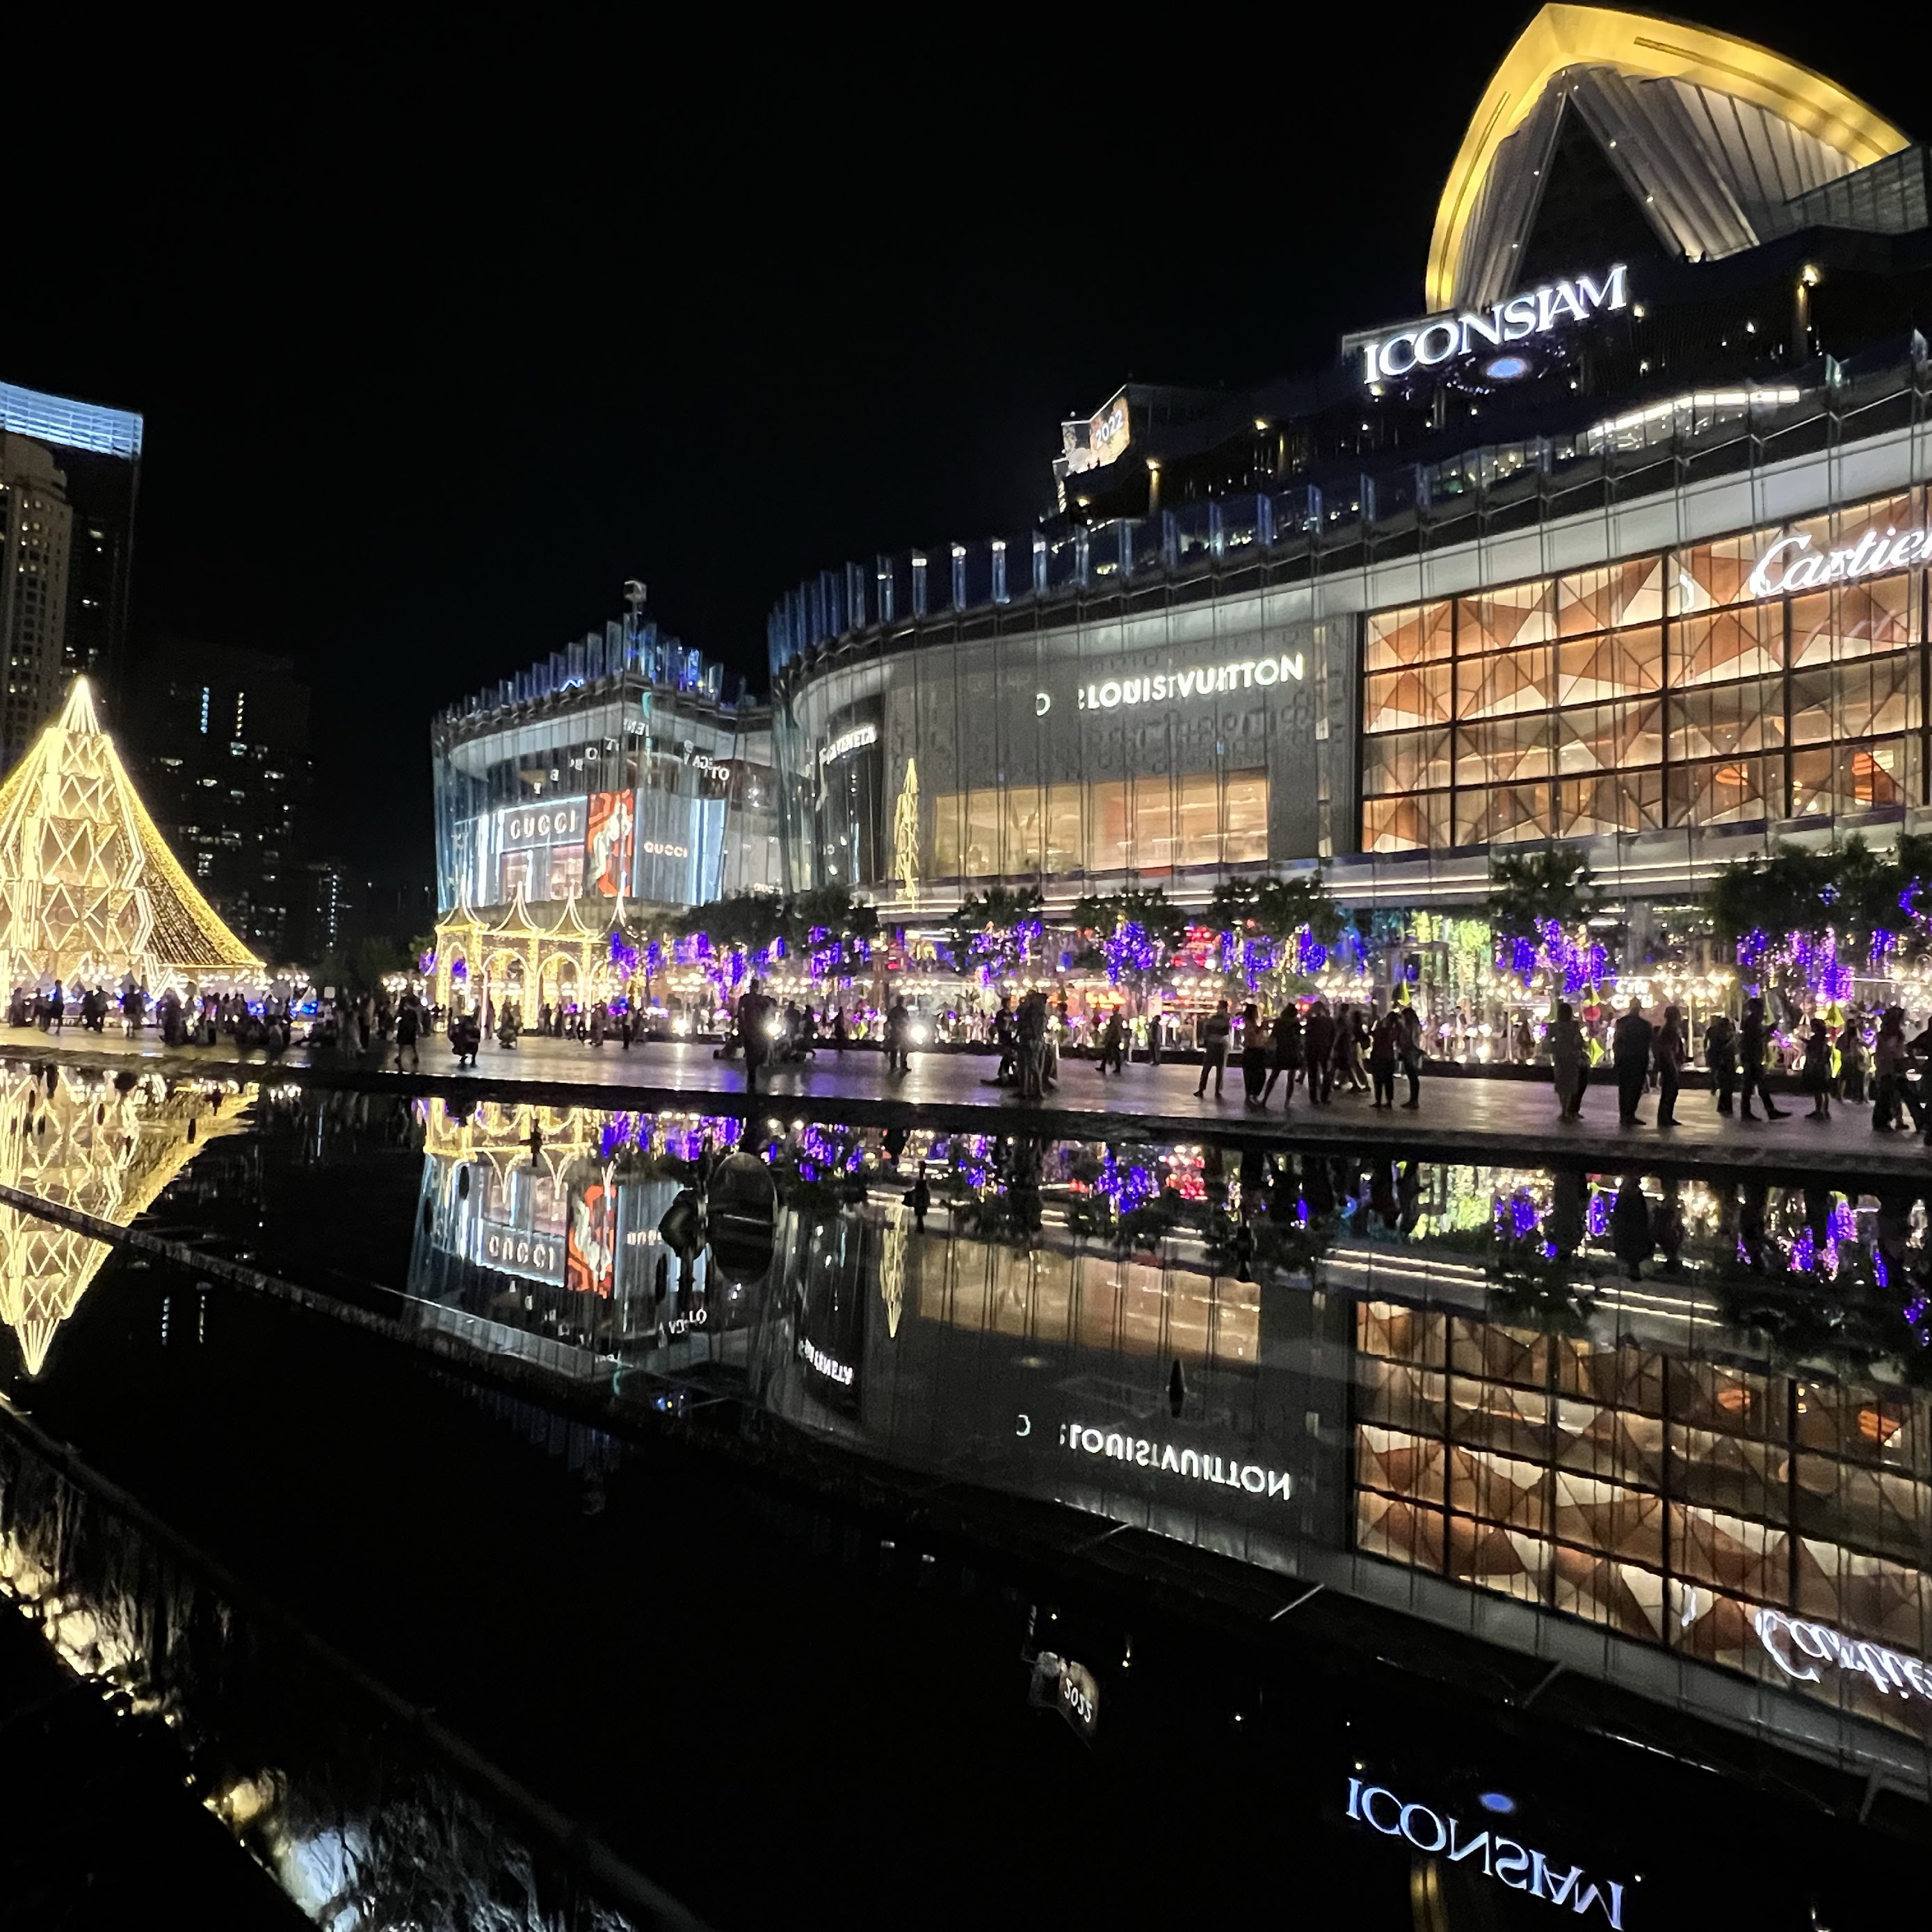 Good eats in ICONSIAM 